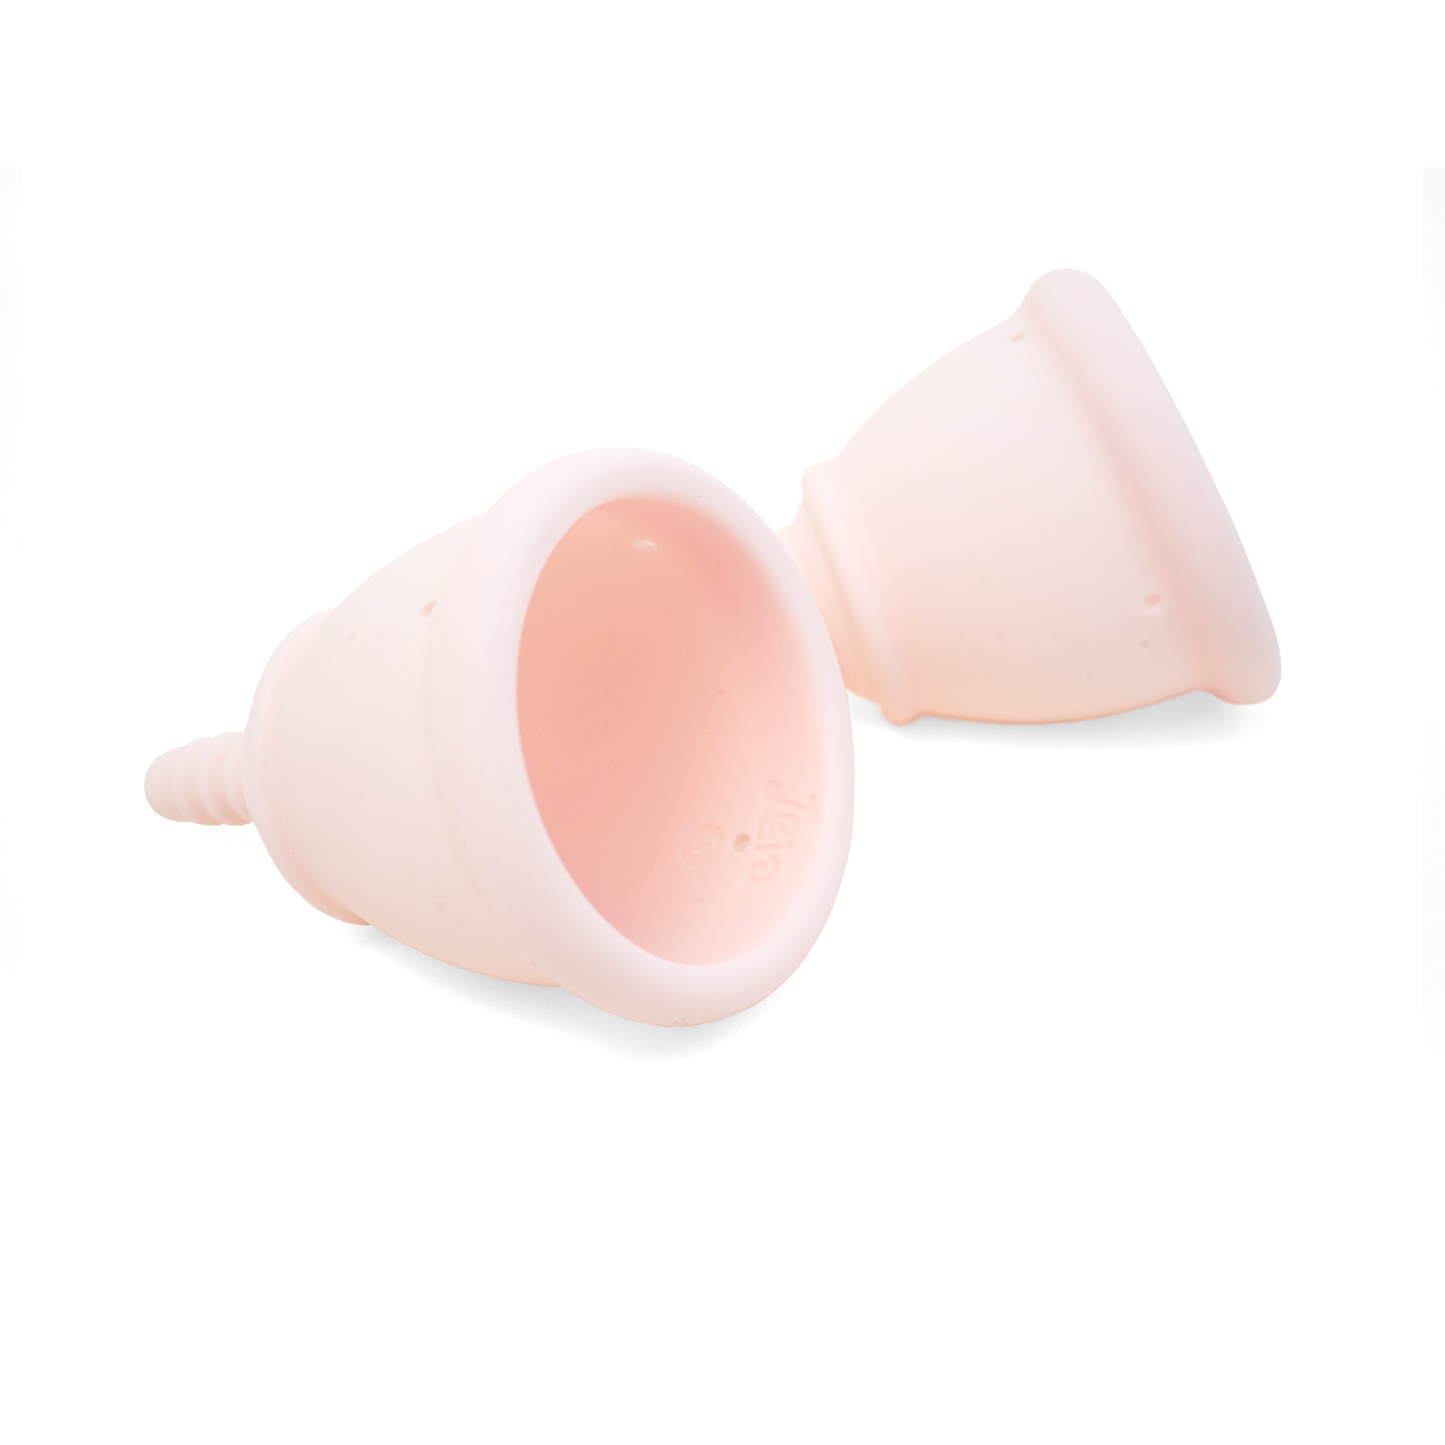 LEIA Menstrual Cup — Size S